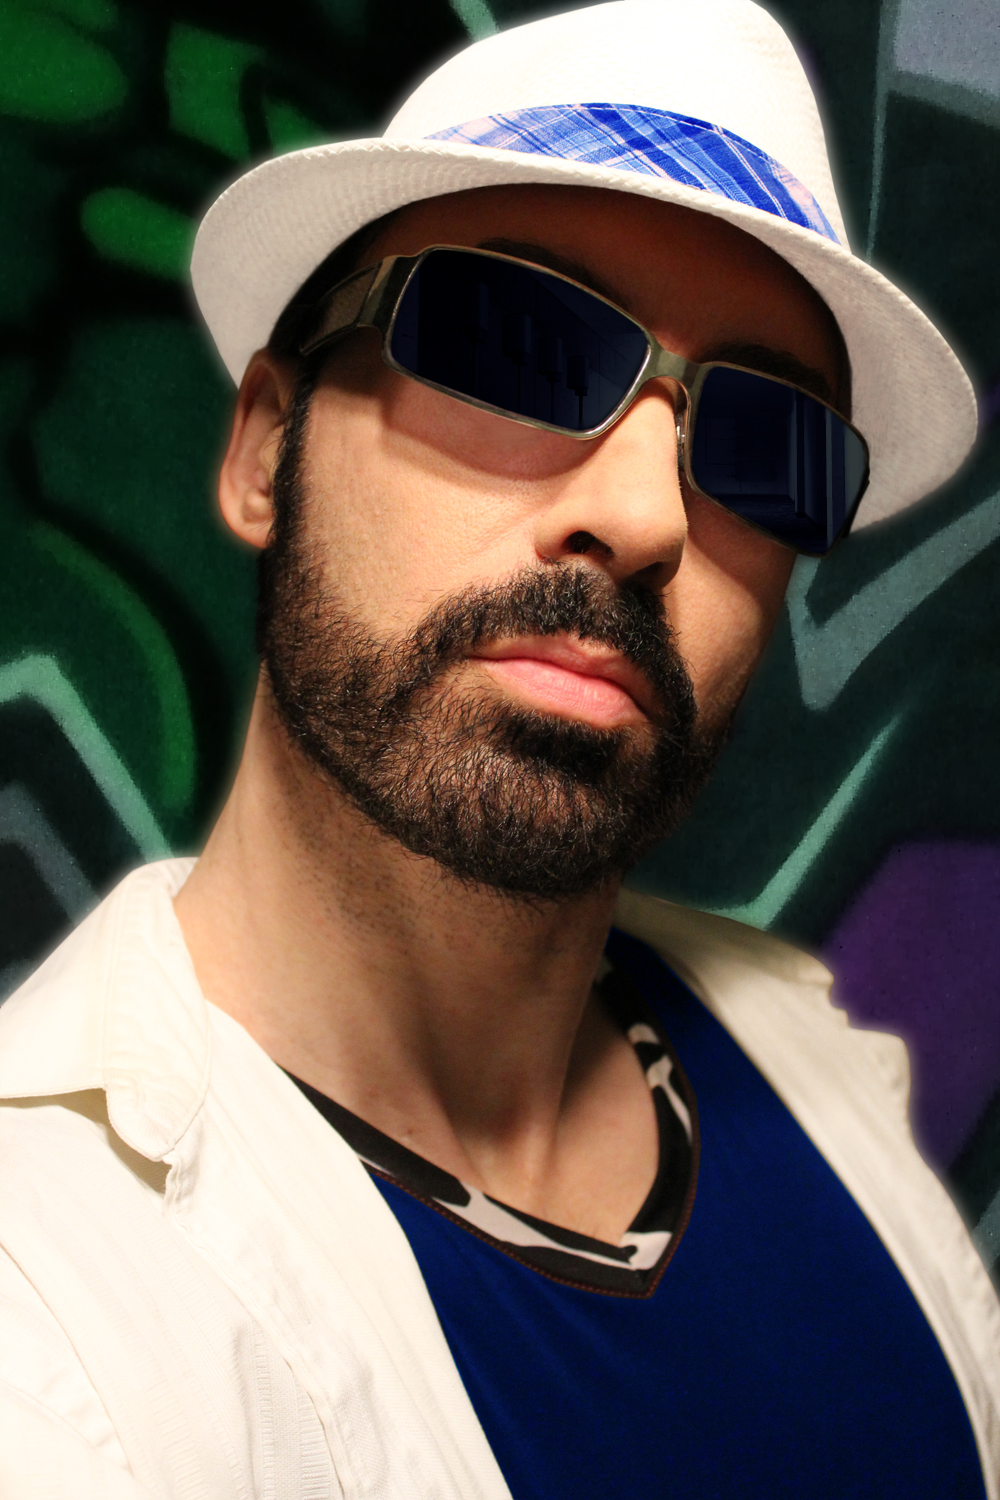 Who says we can't wear white after Labor Day? I've never been 1 to follow conventions. #DarkGlasses #Star #Graffiti #Beard #Fantasy #MoonDazeTV #LifeIsGood